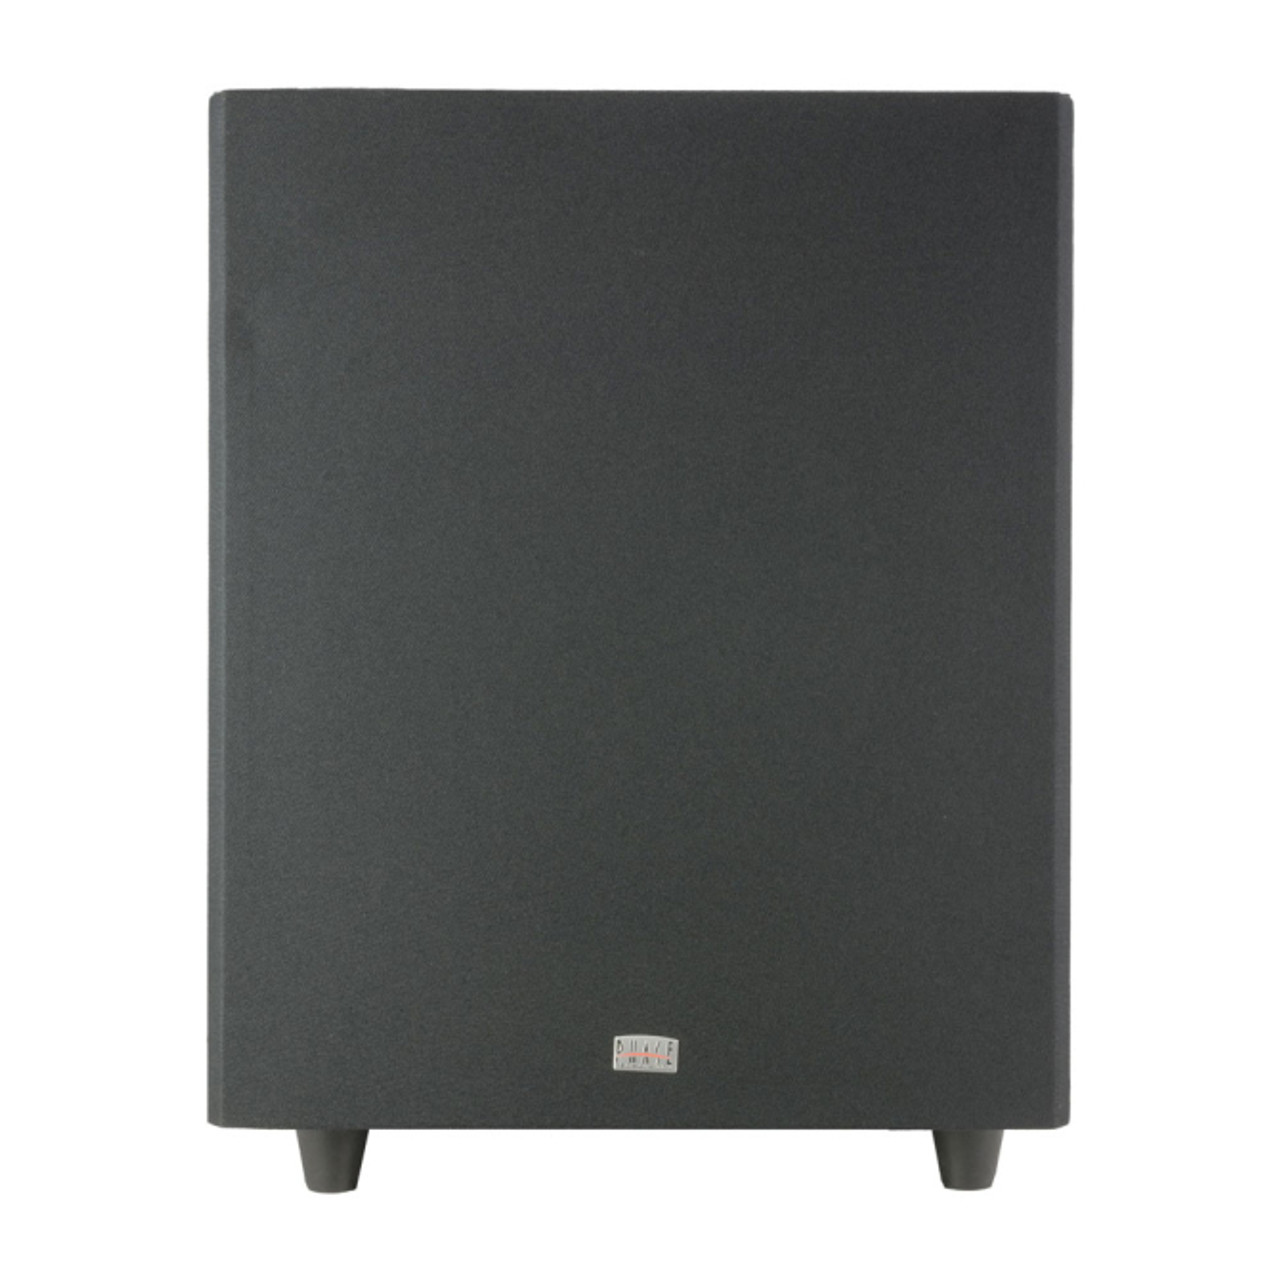 Phase Technology POWER-FL12-II 12" Subwoofer in Black Ash with a Passive Radiator (POWER-FL12-II)